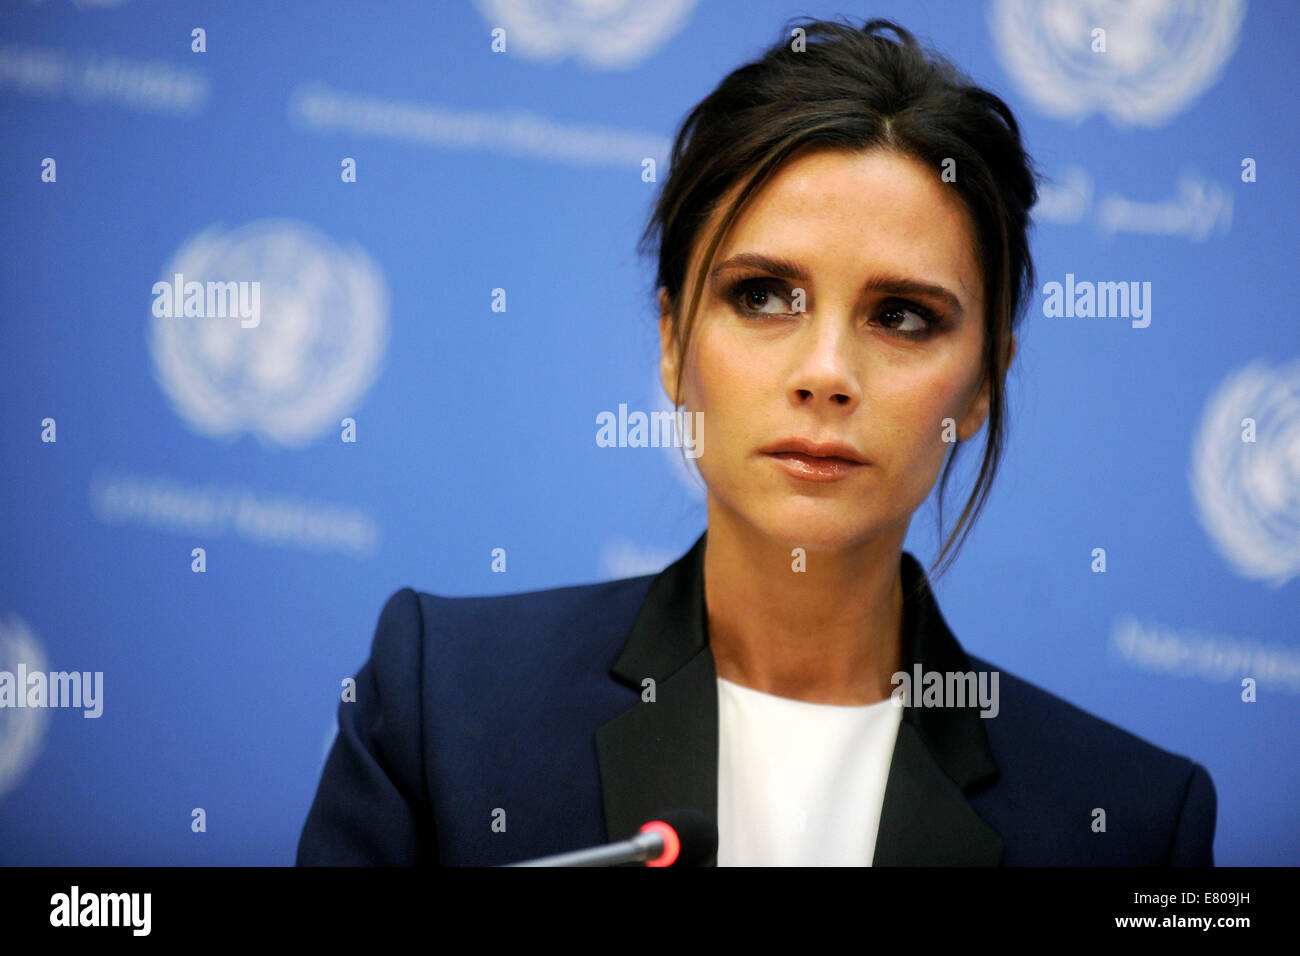 UNAIDS international goodwill ambassador, British fashion designer Victoria Beckham attends a press conference on the sideline of the 69th Session of the UN General Assembly at the United Nations in New York on September 25, 2014/picture alliance Stock Photo